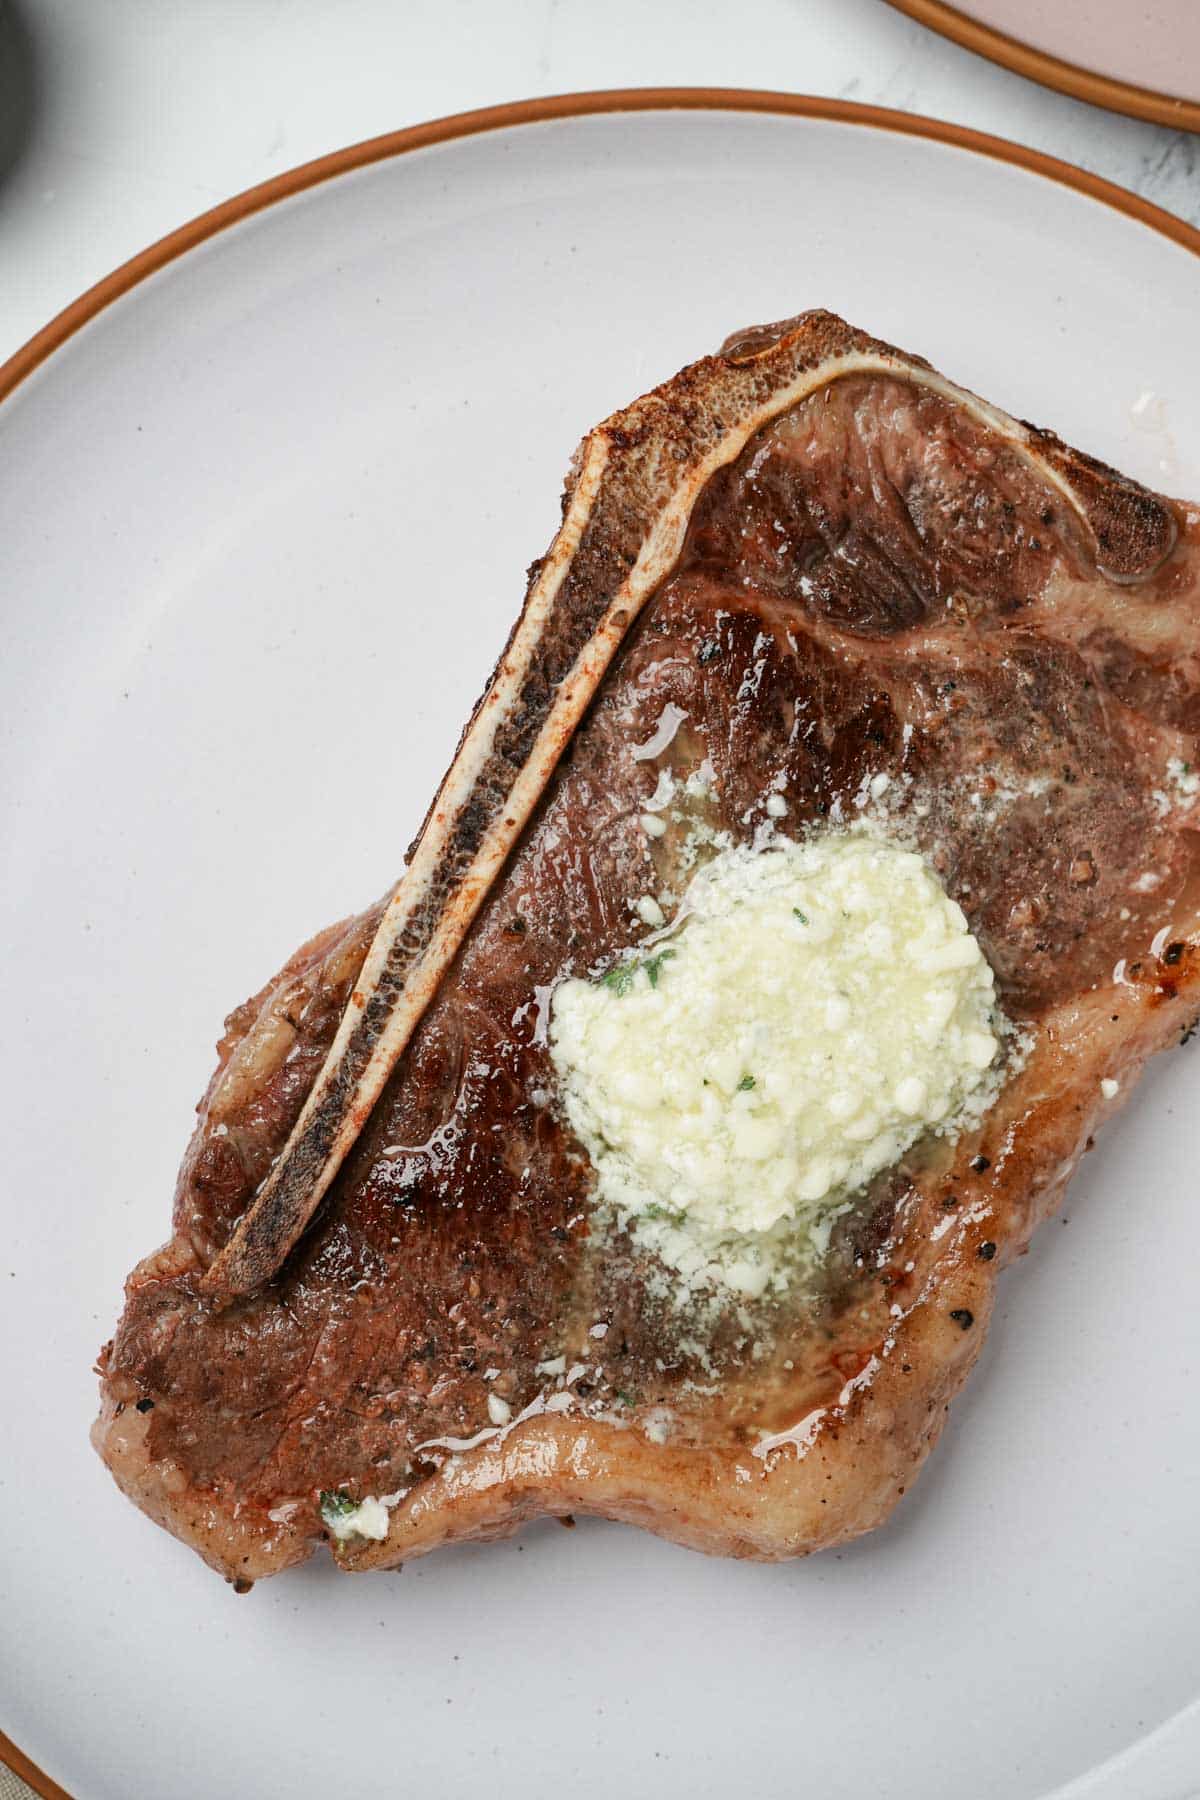 https://www.wenthere8this.com/wp-content/uploads/2023/06/sous-vide-new-york-strip-9.jpg